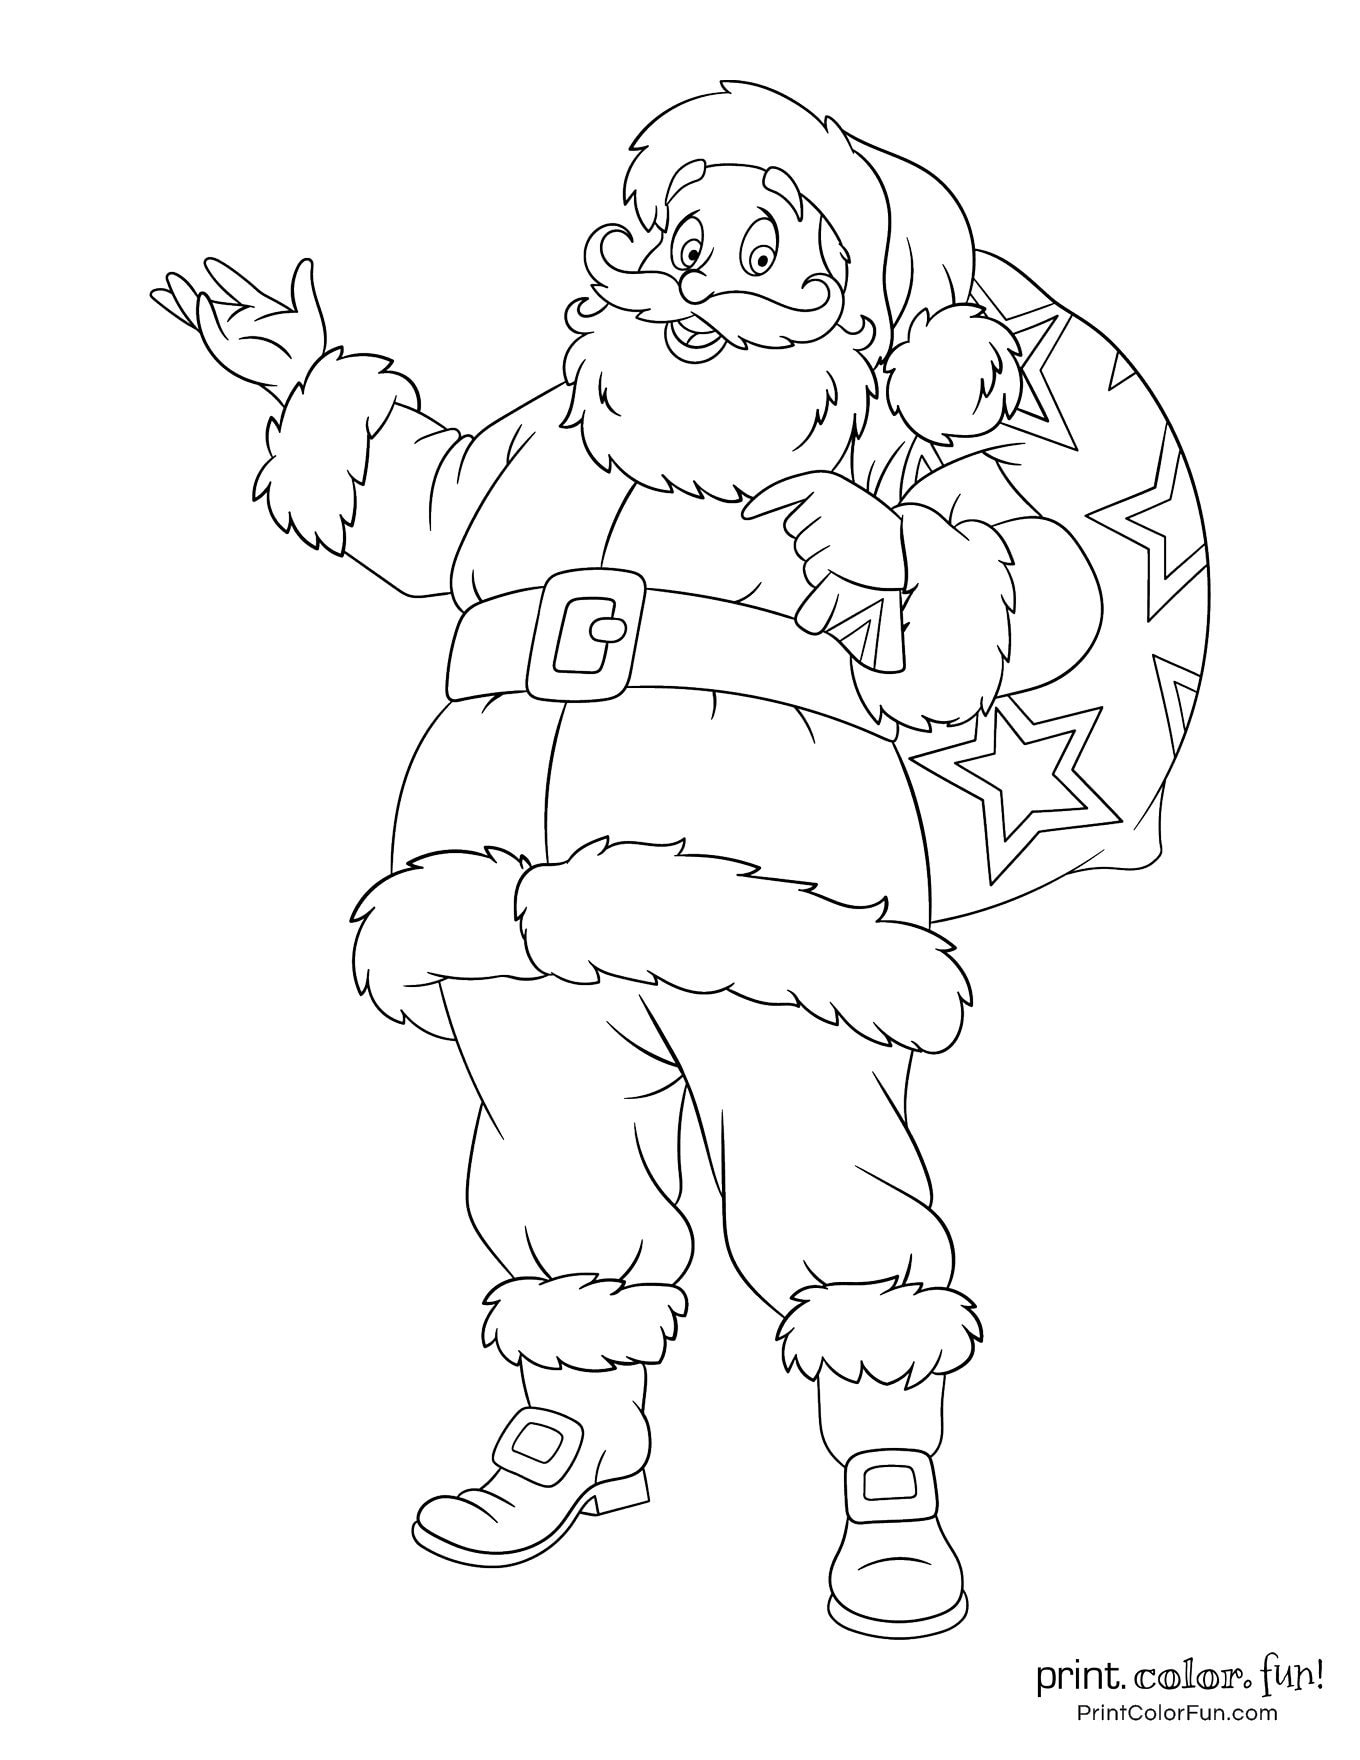 10 cute Santa Claus Christmas coloring pages (plus 'Twas The Night